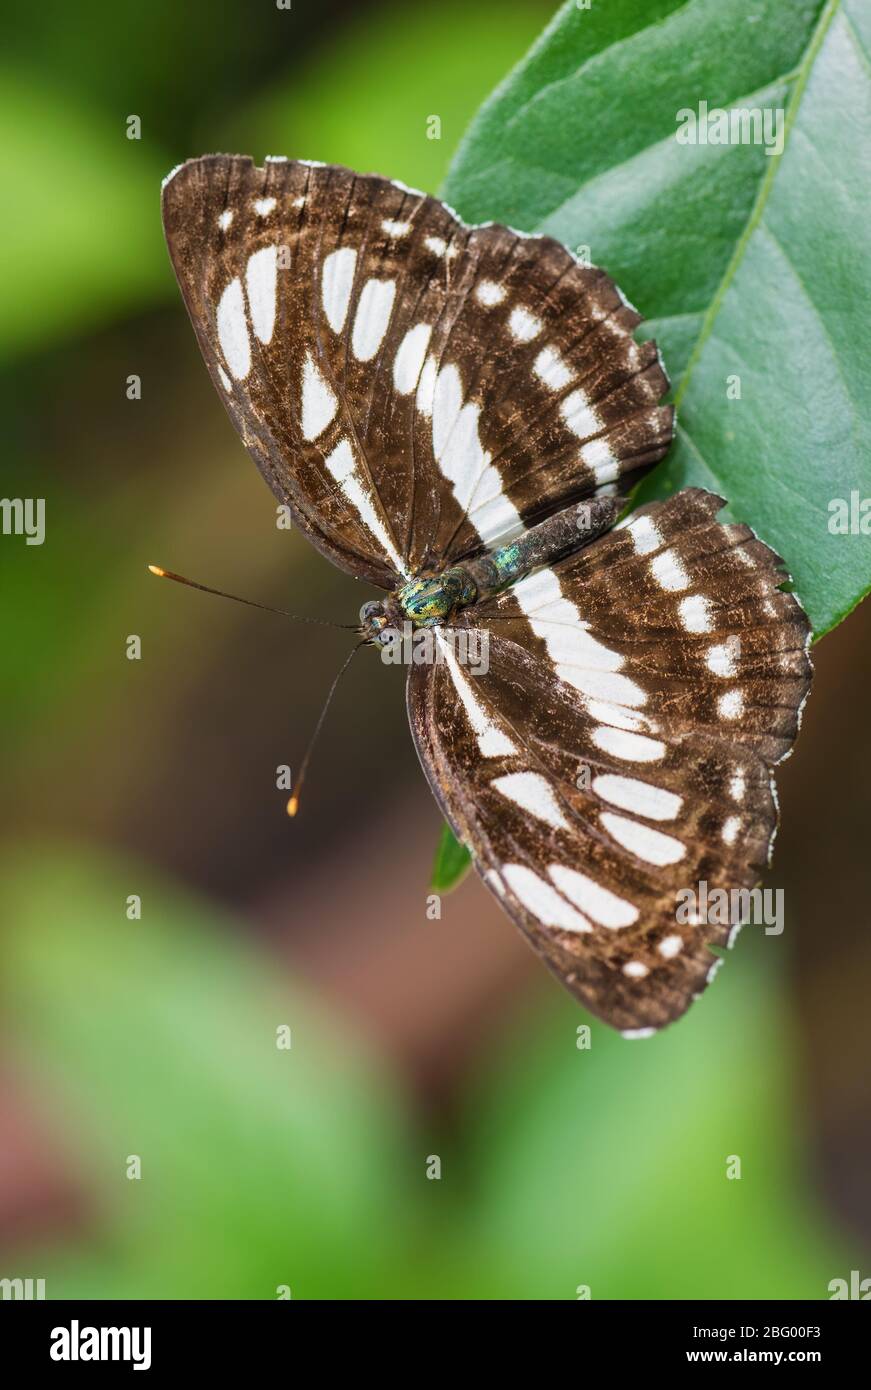 Common Sailor - Neptis hylas, beautiful small brown and white butterfly from Southeast Asian meadows and woodlands, Malaysia. Stock Photo